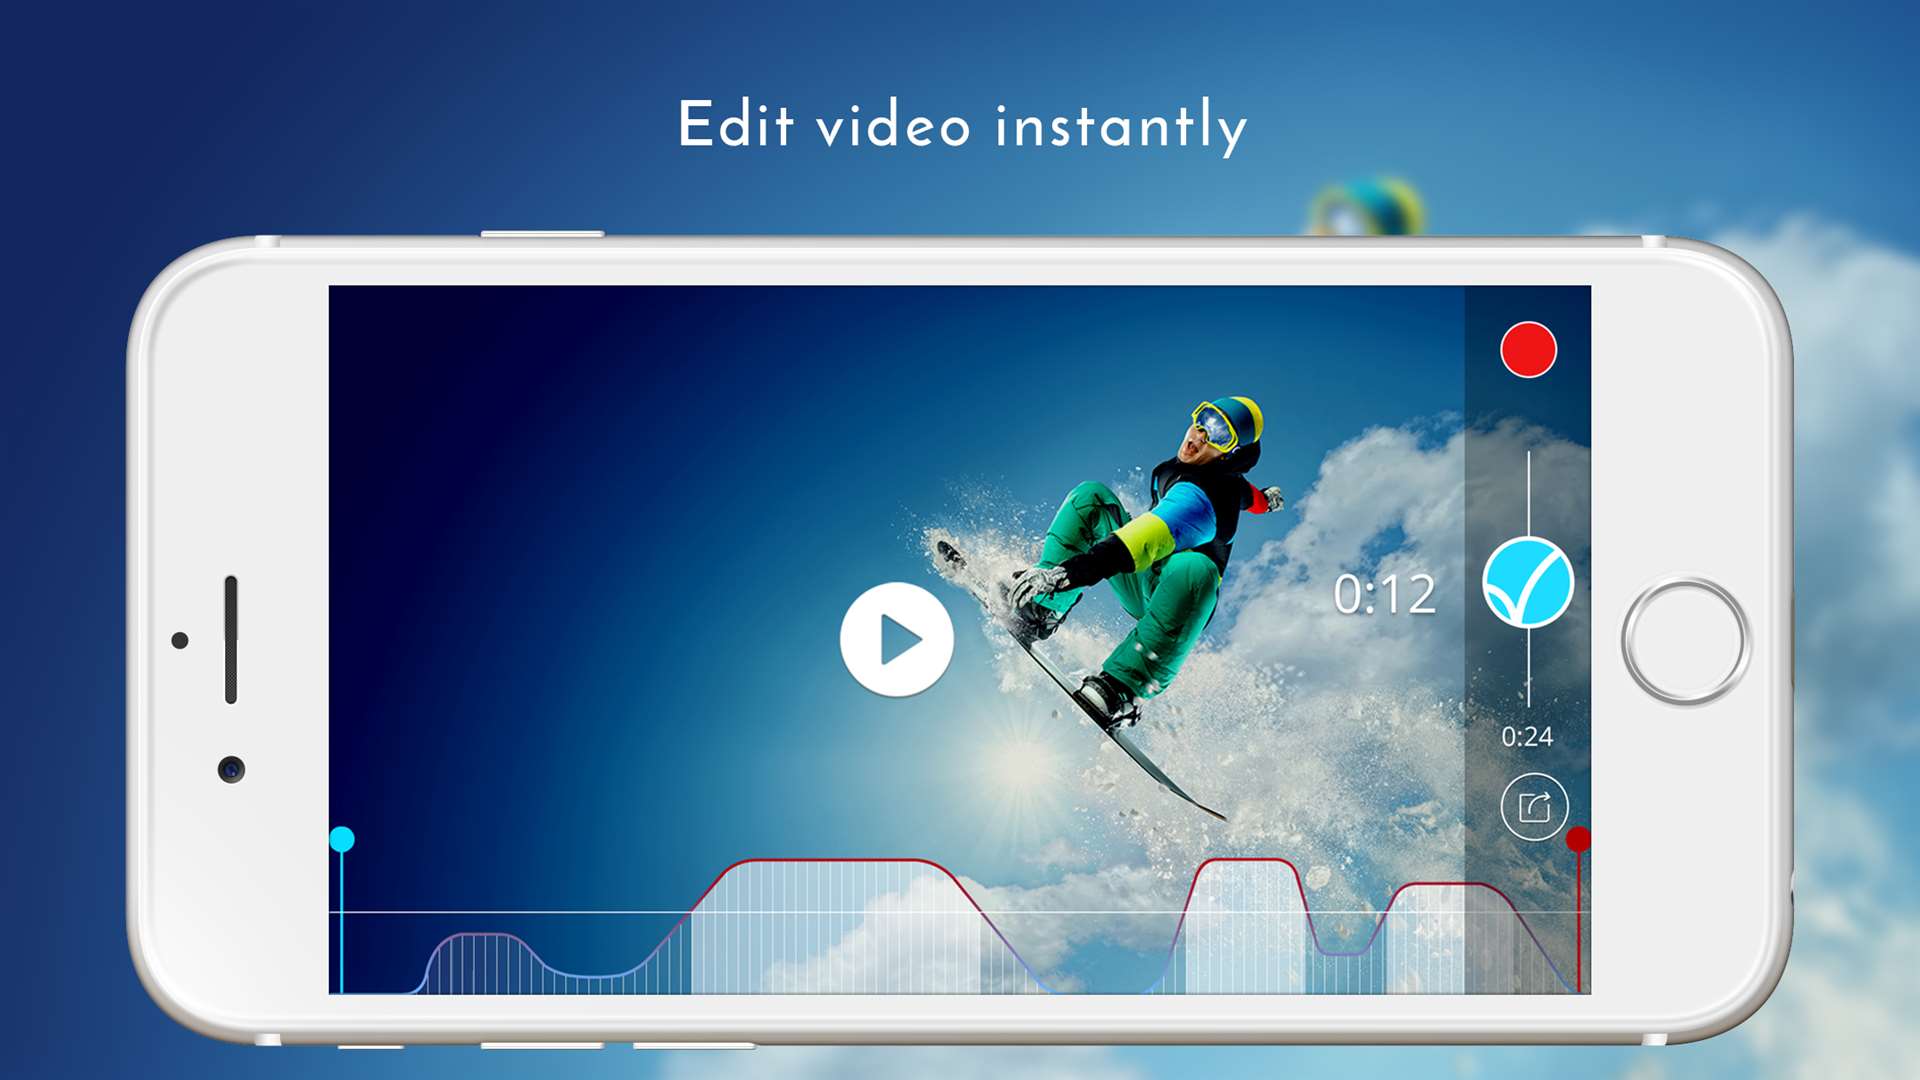 Velapp allows users to edit video live while they are shooting